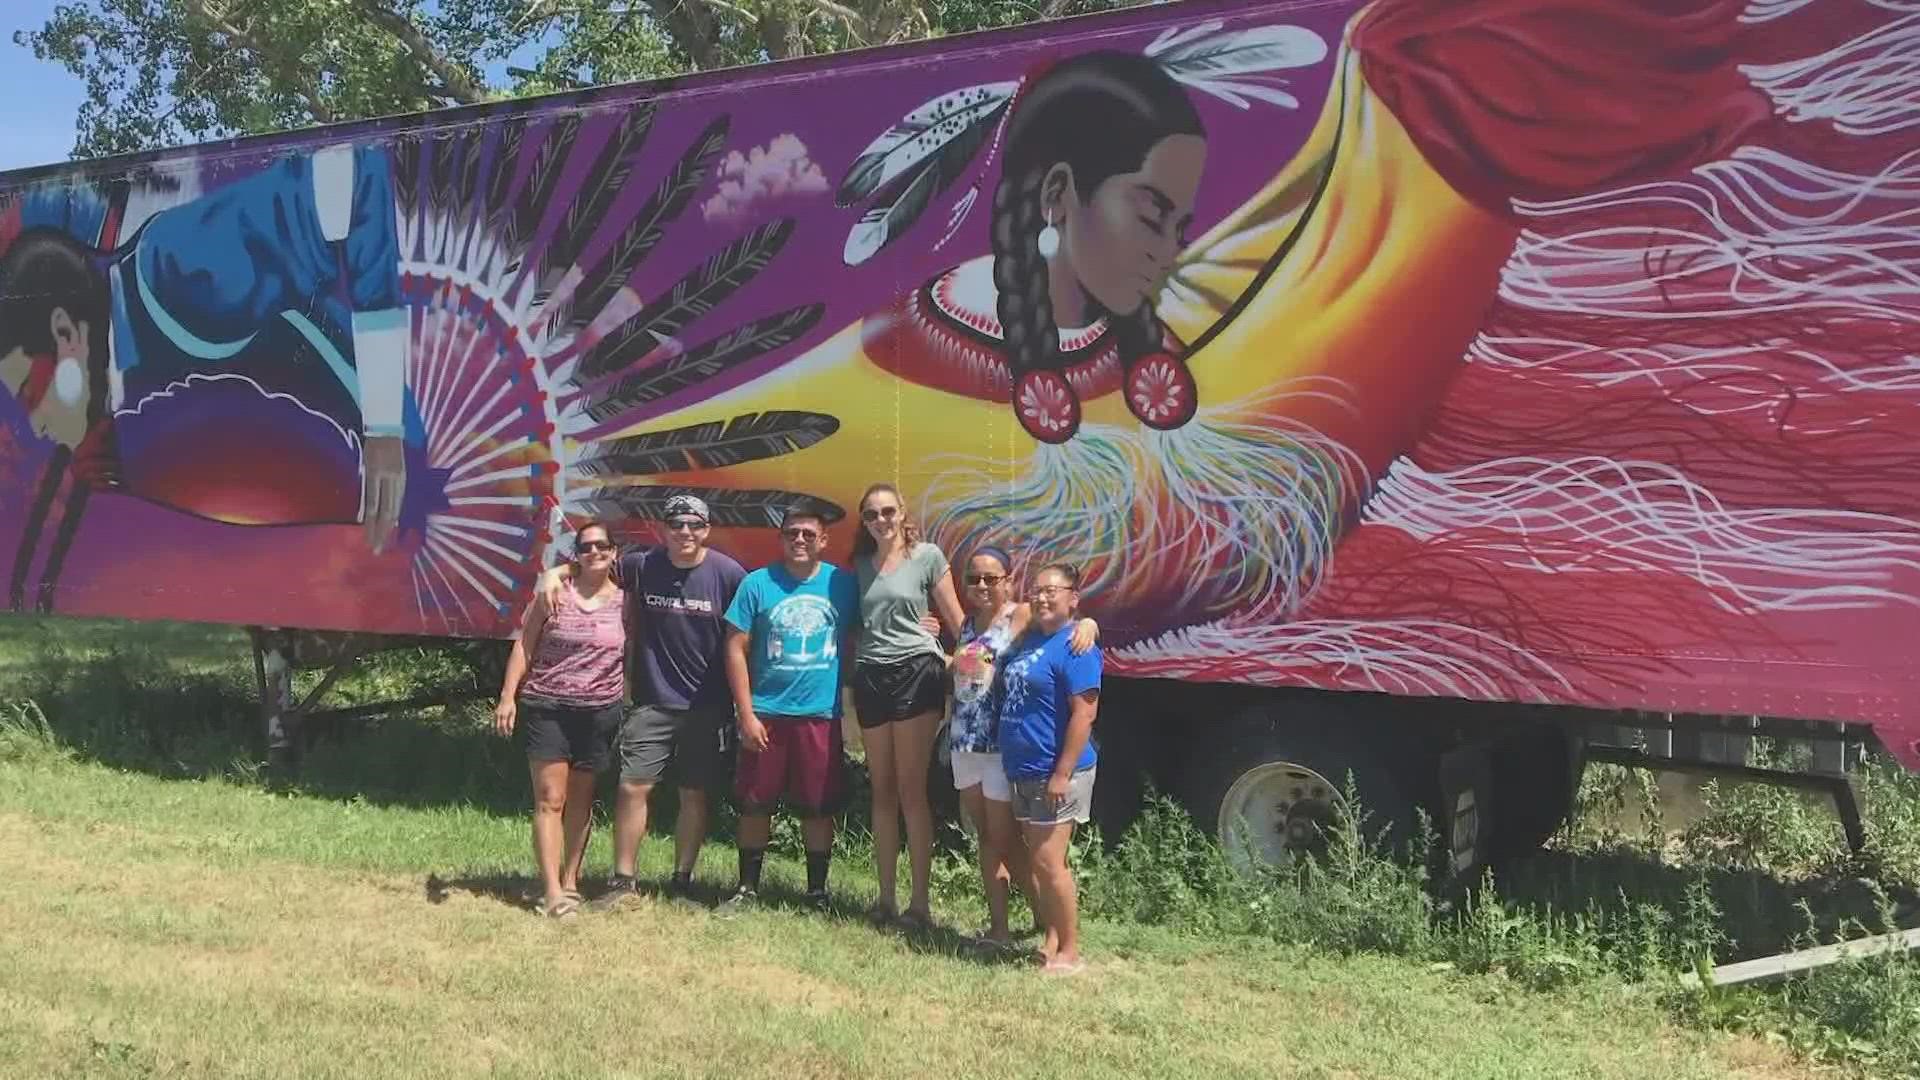 The Native American Indian Center of Central Ohio (NAICCO) is doing more than just celebrating; they're working to secure a place for future generations.